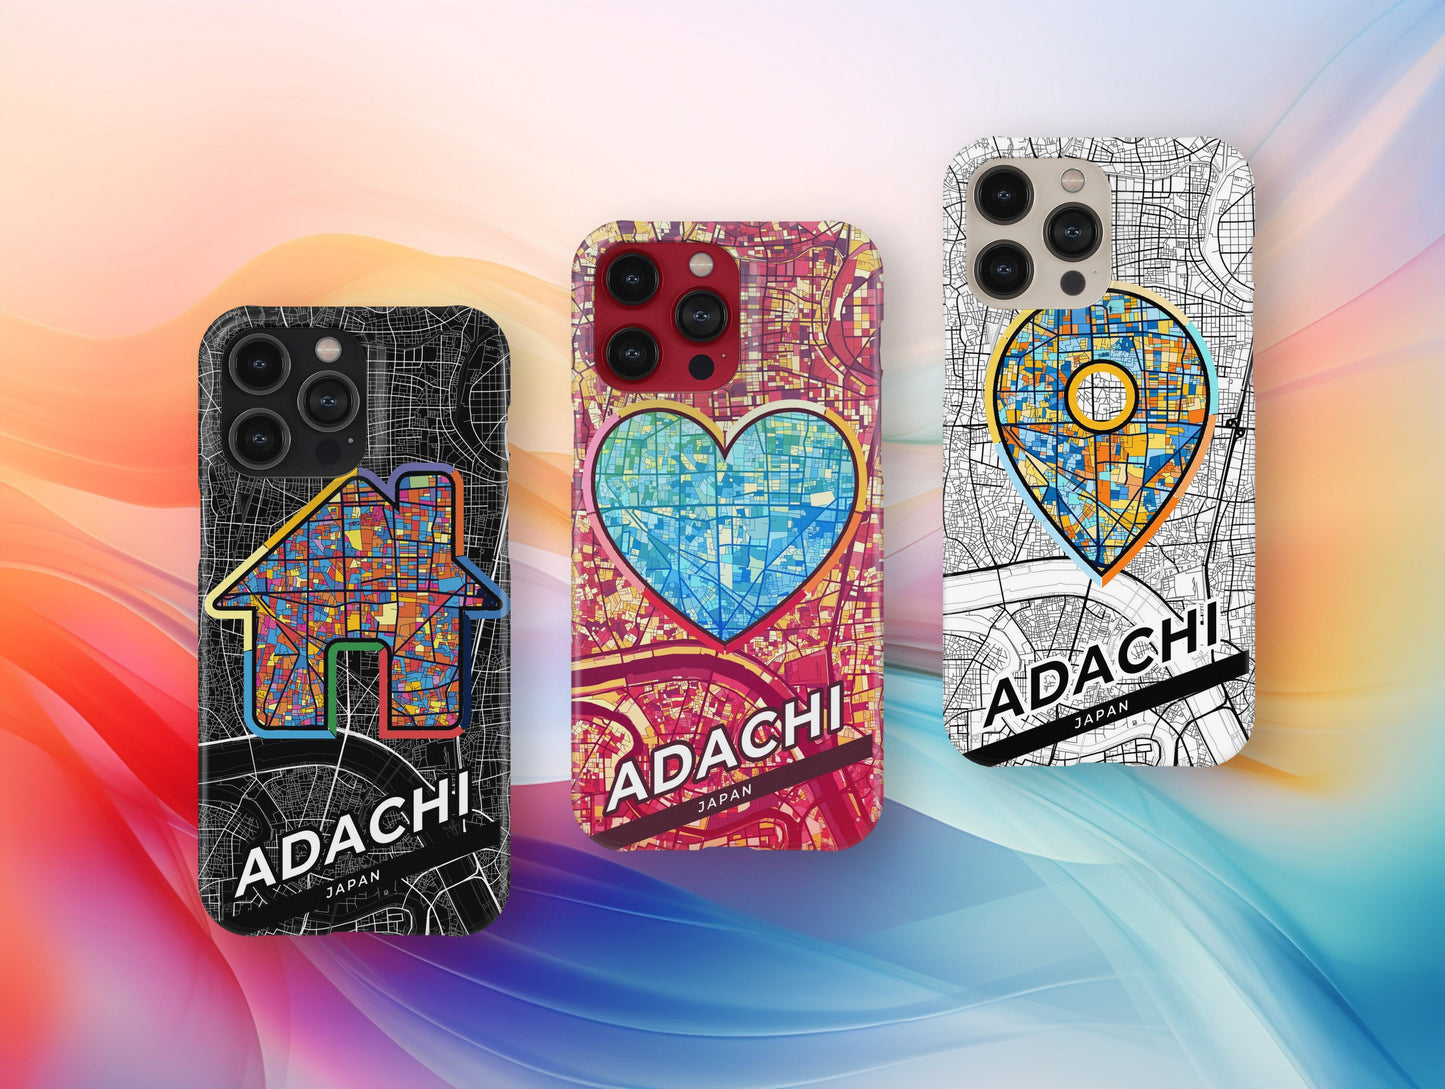 Adachi Japan slim phone case with colorful icon. Birthday, wedding or housewarming gift. Couple match cases.